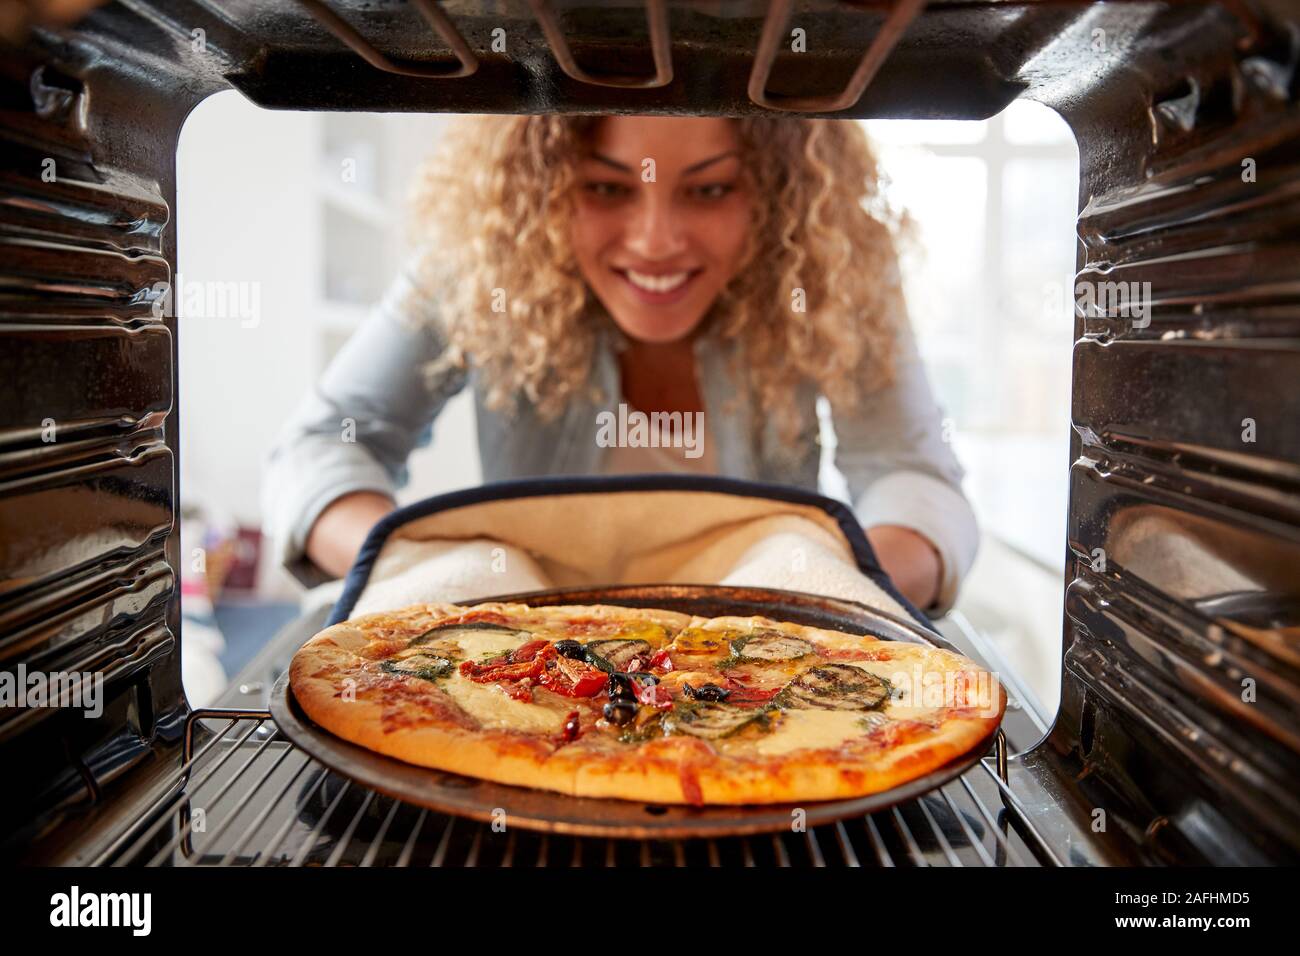 View Looking Out From Inside Oven As Woman Cooks Fresh Pizza Stock Photo